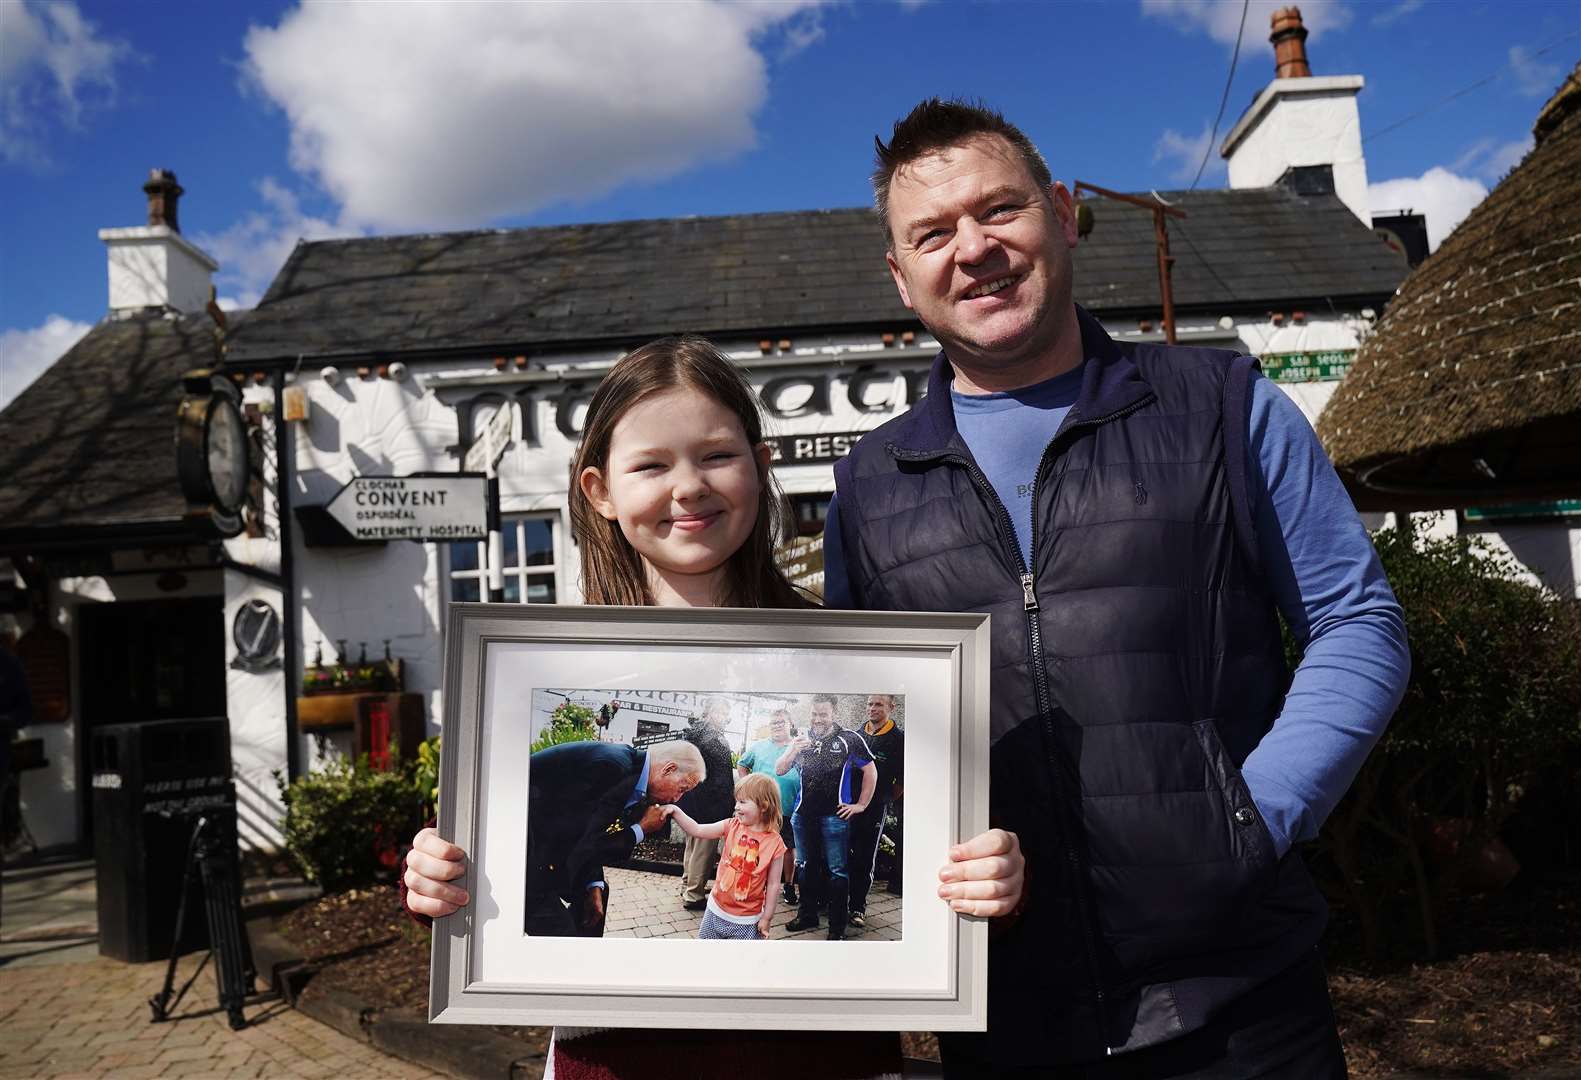 Aoibhinn Brennan, 12, from Lordship, Co Louth, with her father Shane Brennan outside Fitzpatrick’s Pub & Restaurant in Jenkinstown, where as a five-year-old she met then vice president Joe Biden during his visit in 2016 (Brian Lawless/PA)